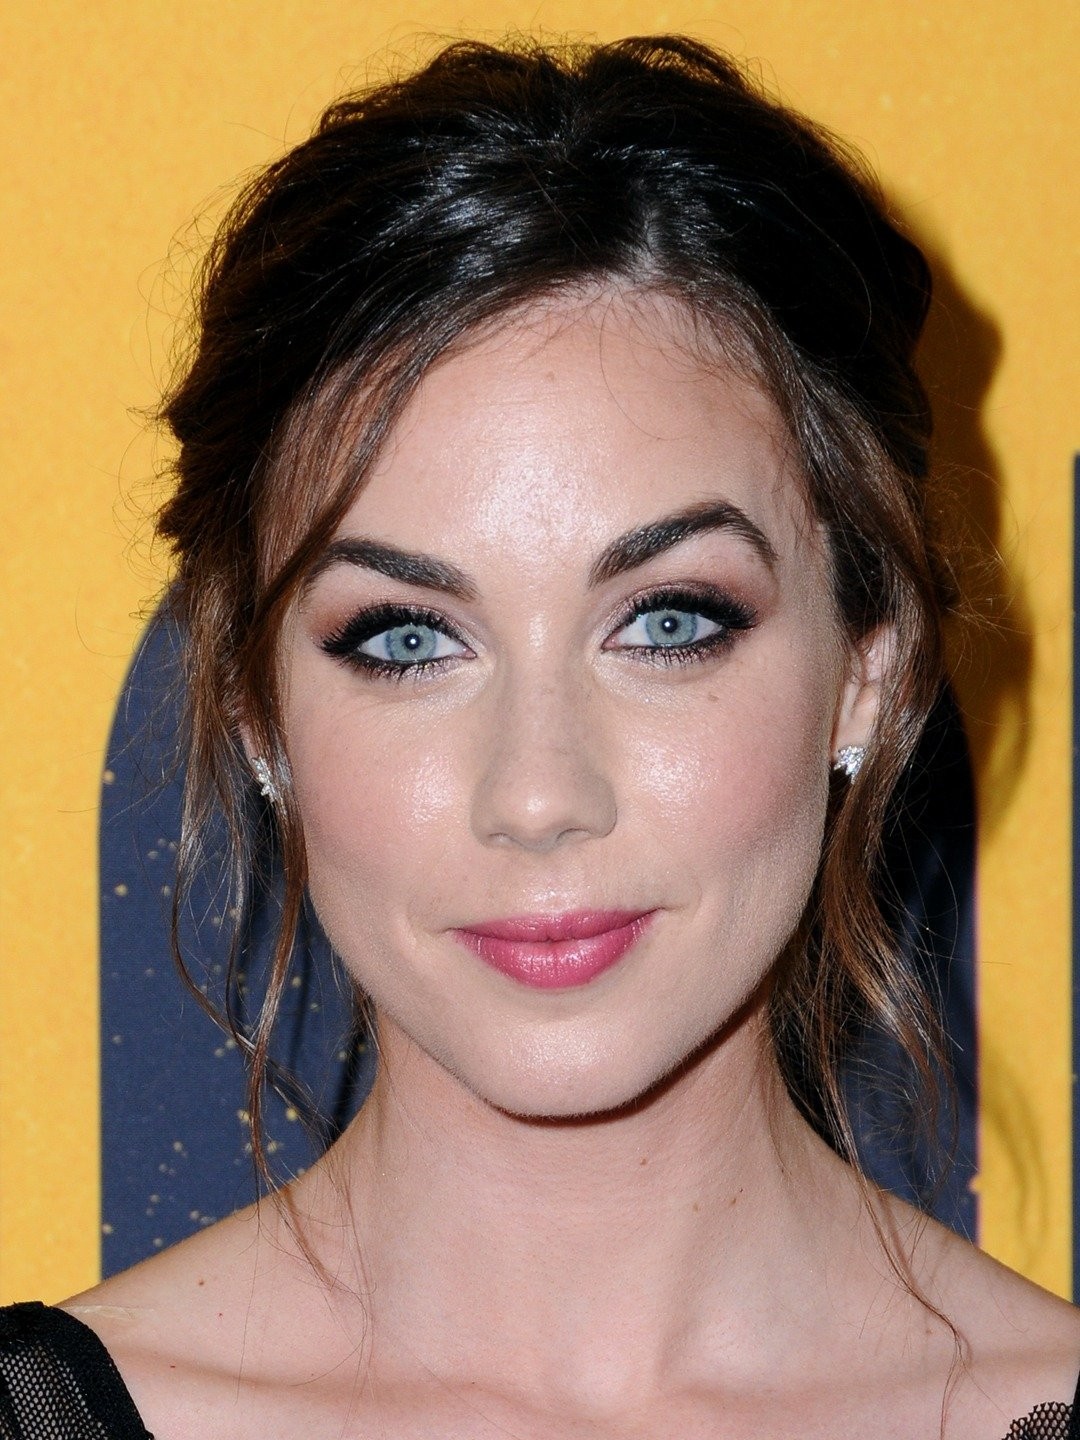 Lyndon smith movies and tv shows